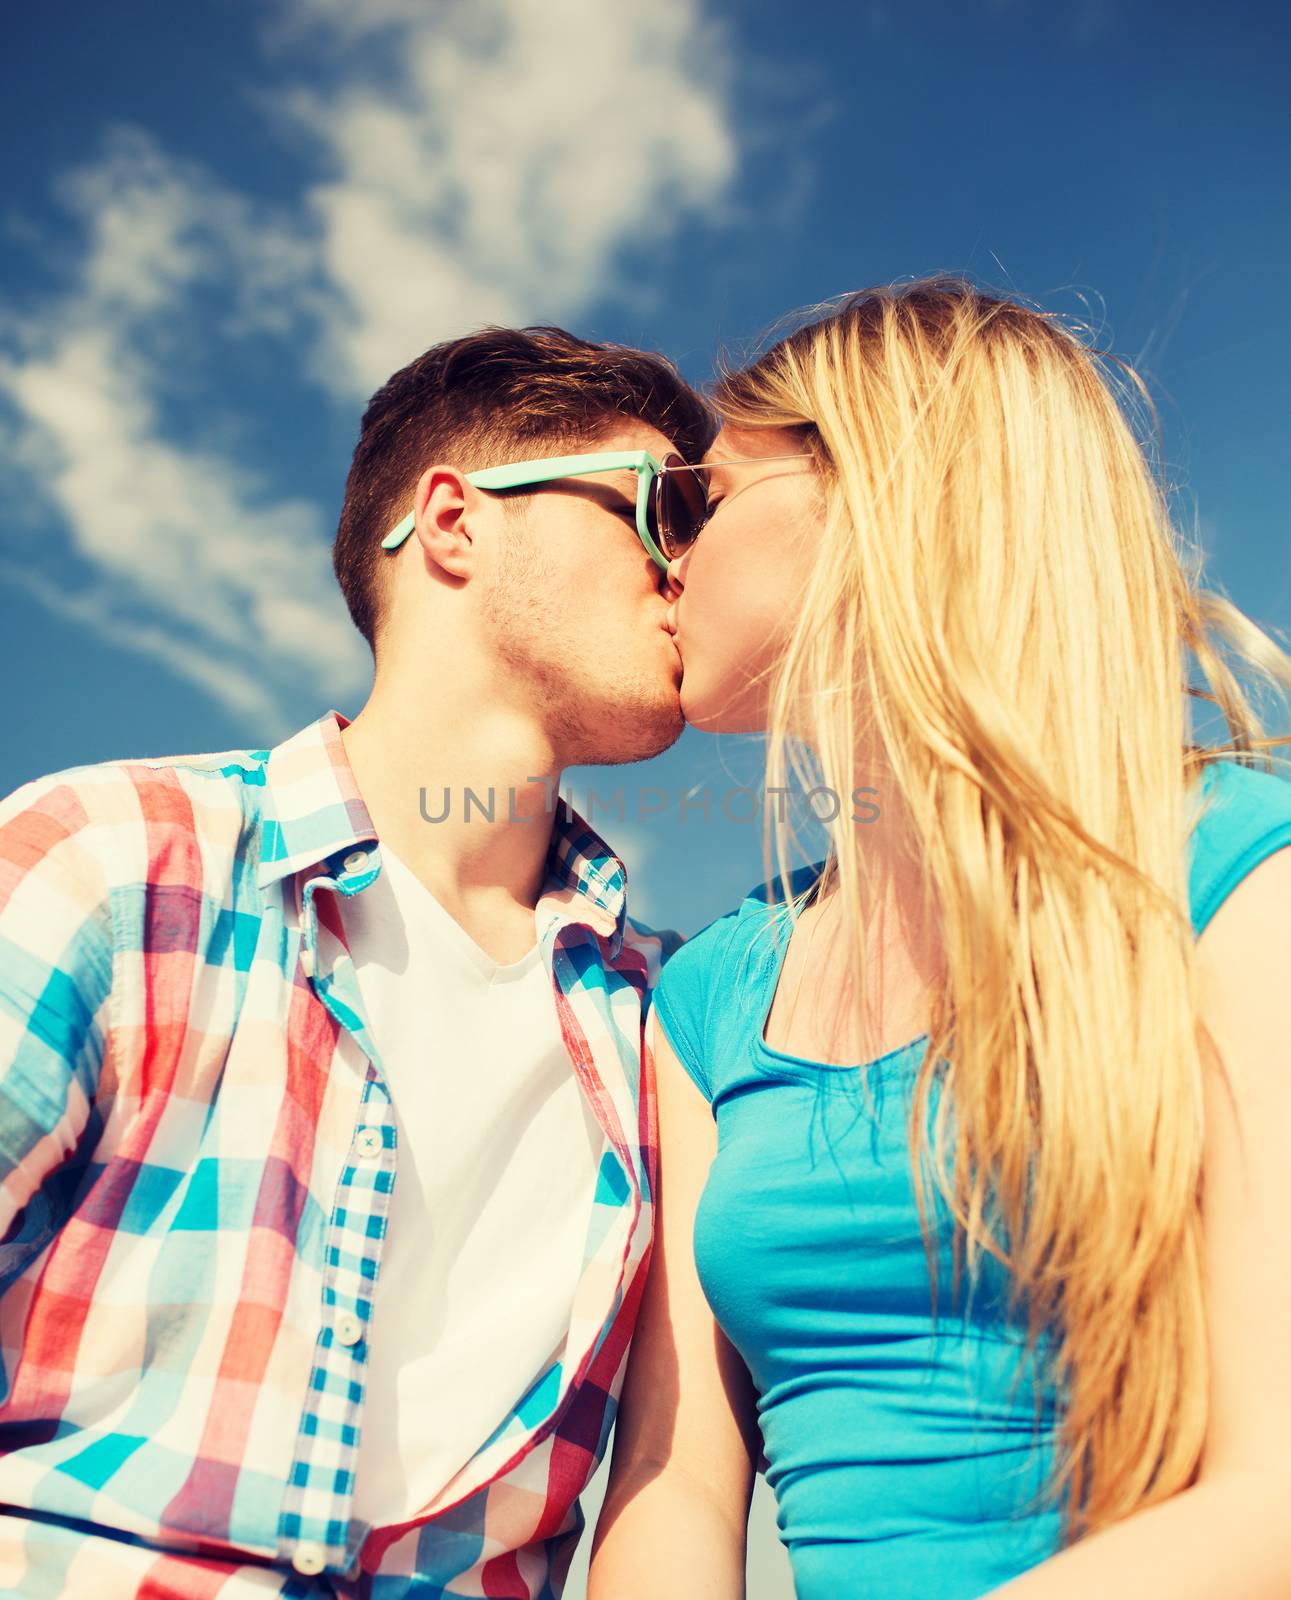 holidays, vacation, love and friendship concept - smiling couple kissing outdoors